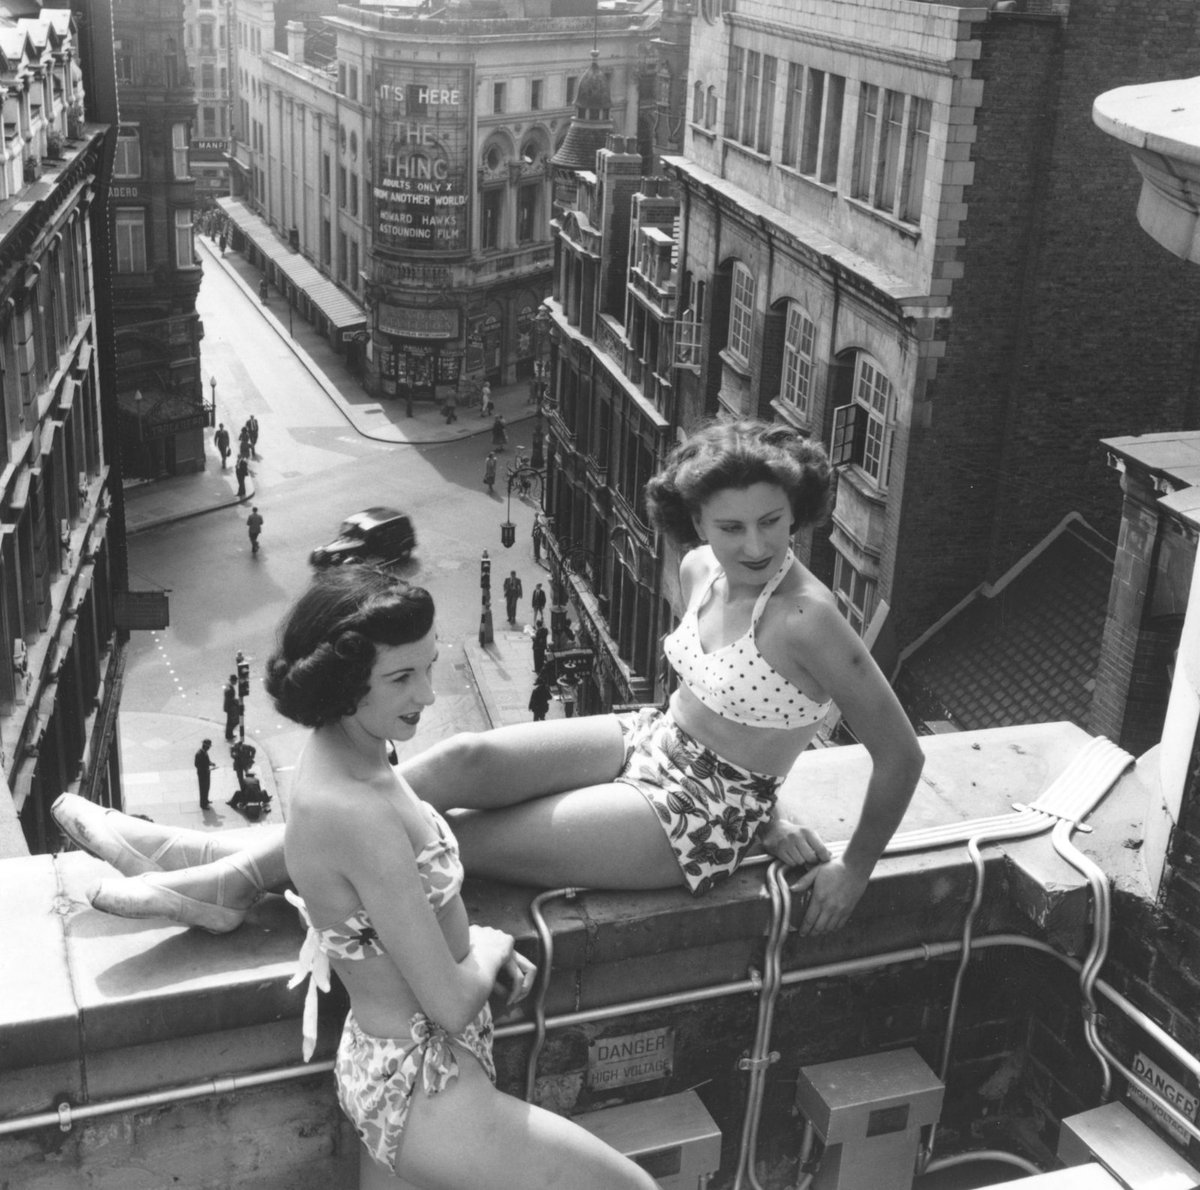 Women sunbathing, Piccadilly Square, London, 1953. In the background the cinema is showing The Thing from Another World.